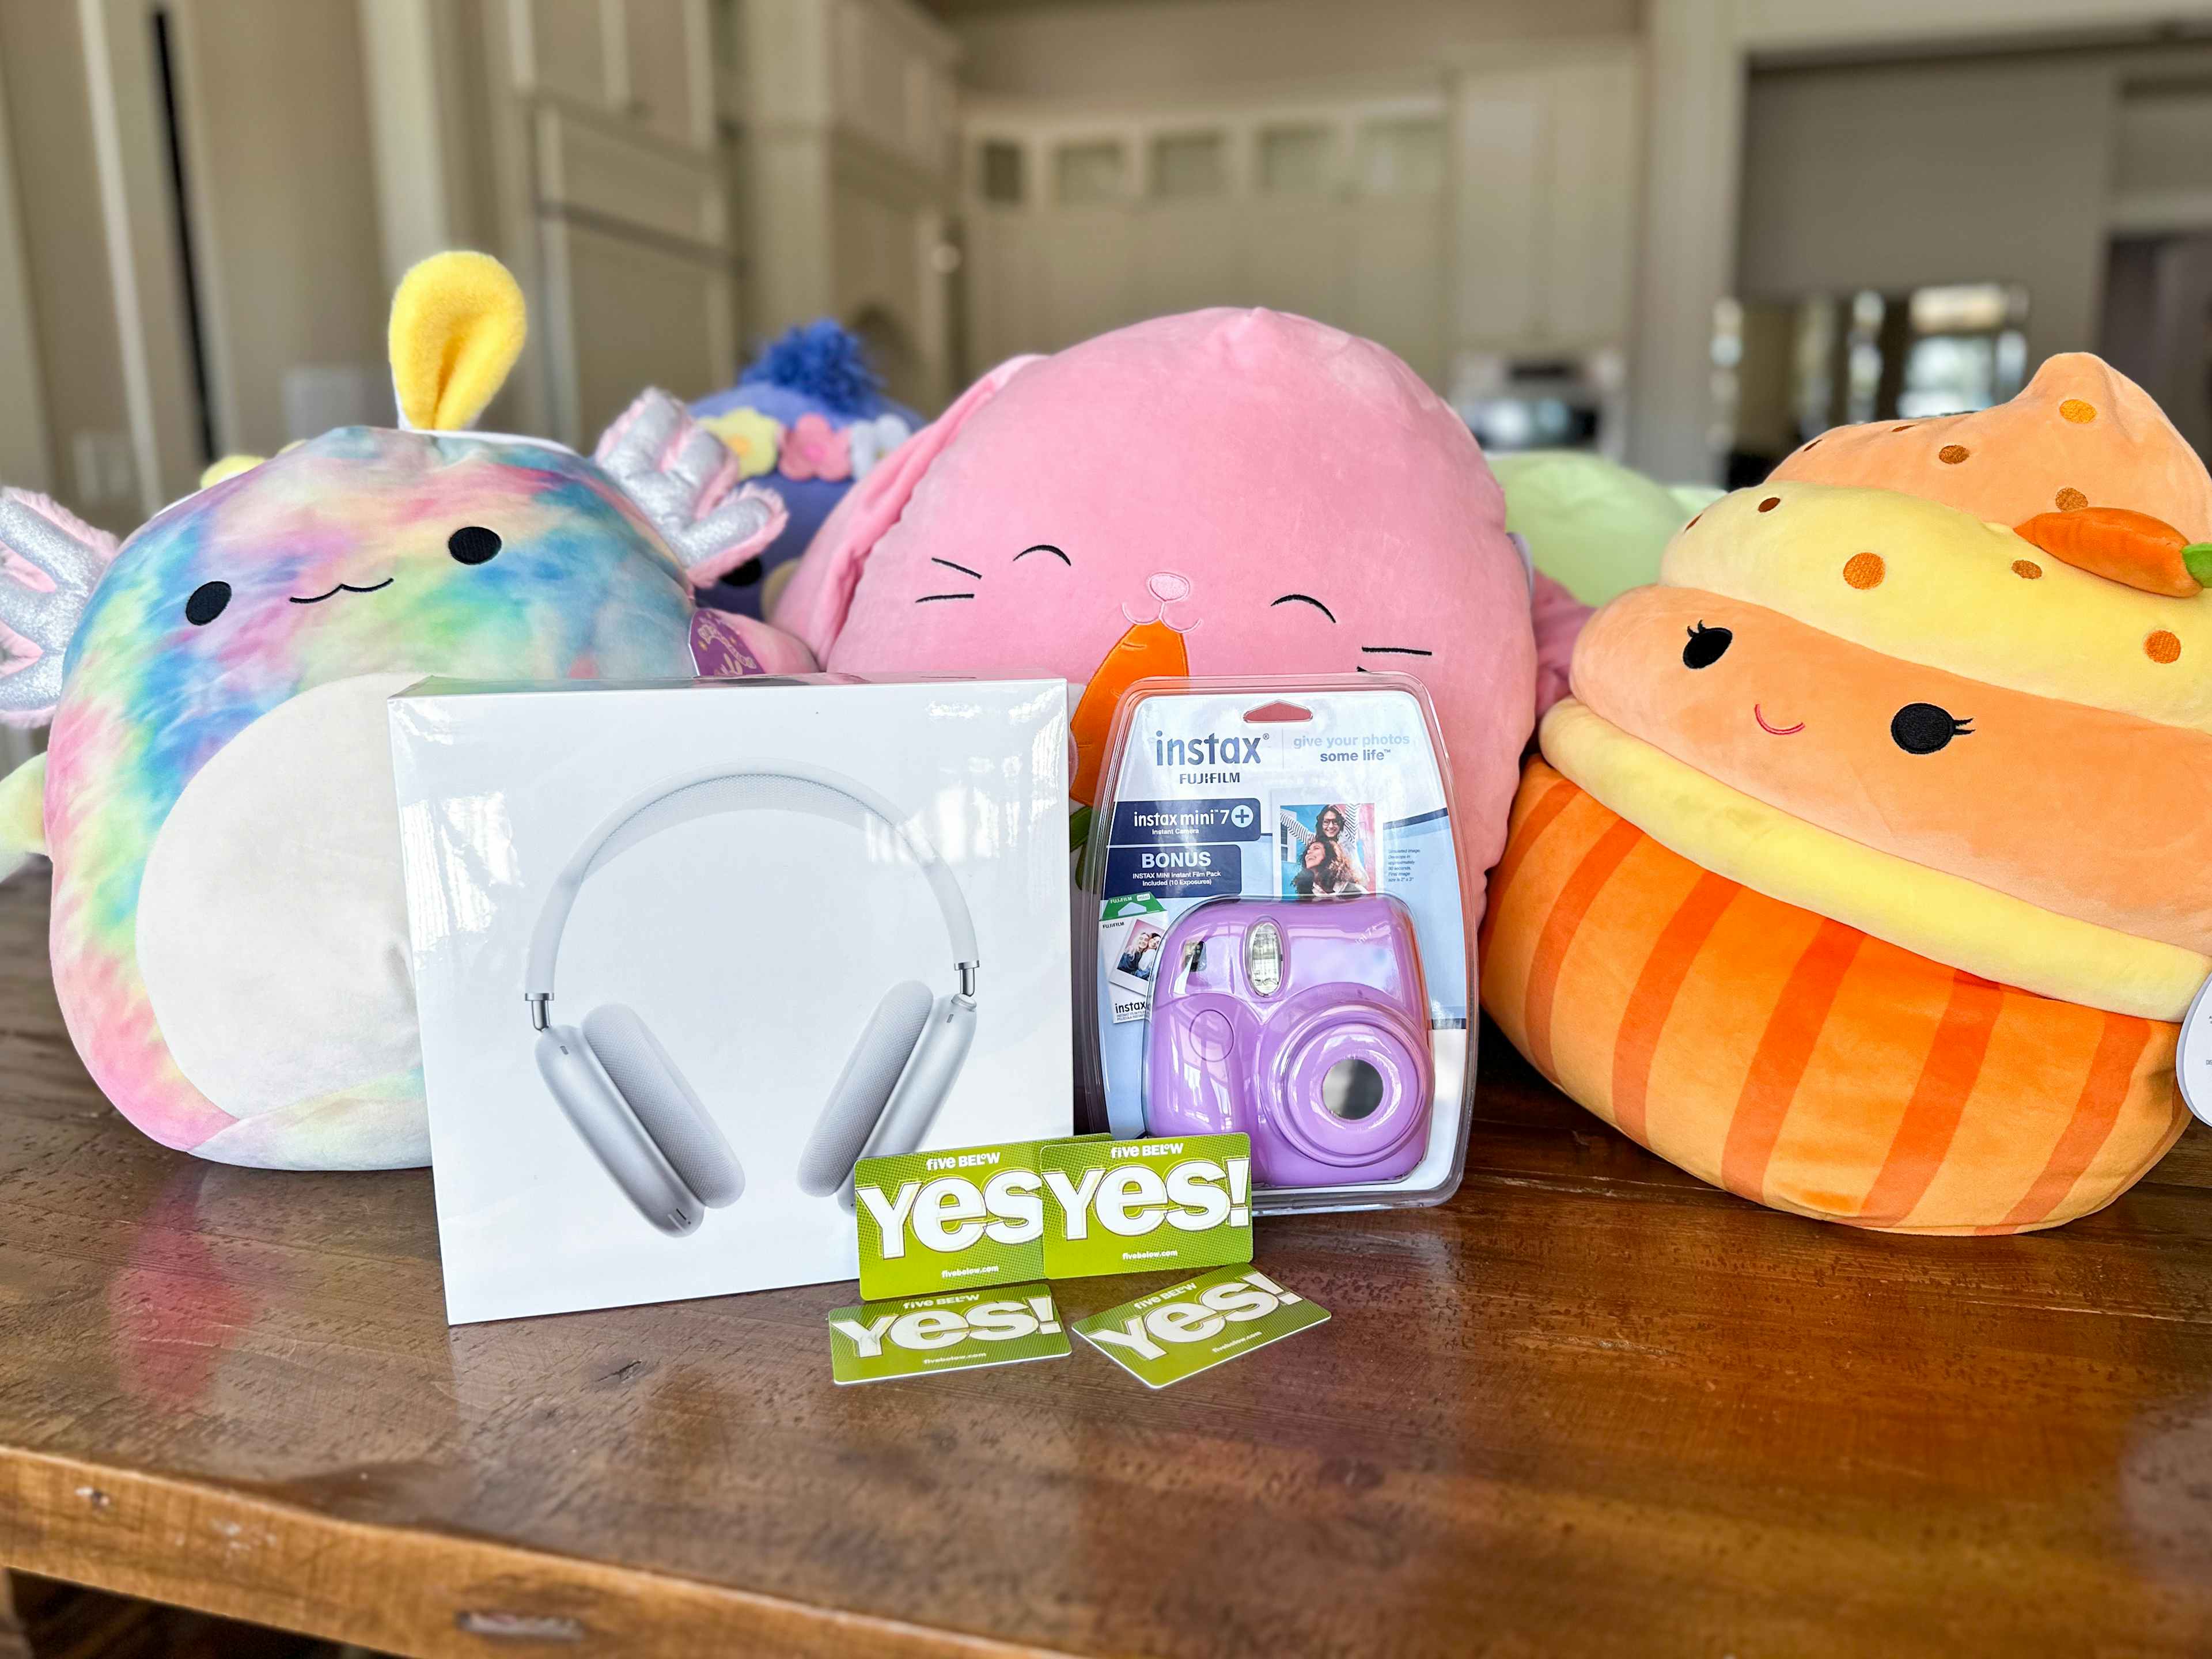 15-anniversary-kcl-squishmallows-airpods-max-five-below-gift-card-instax-camera-1